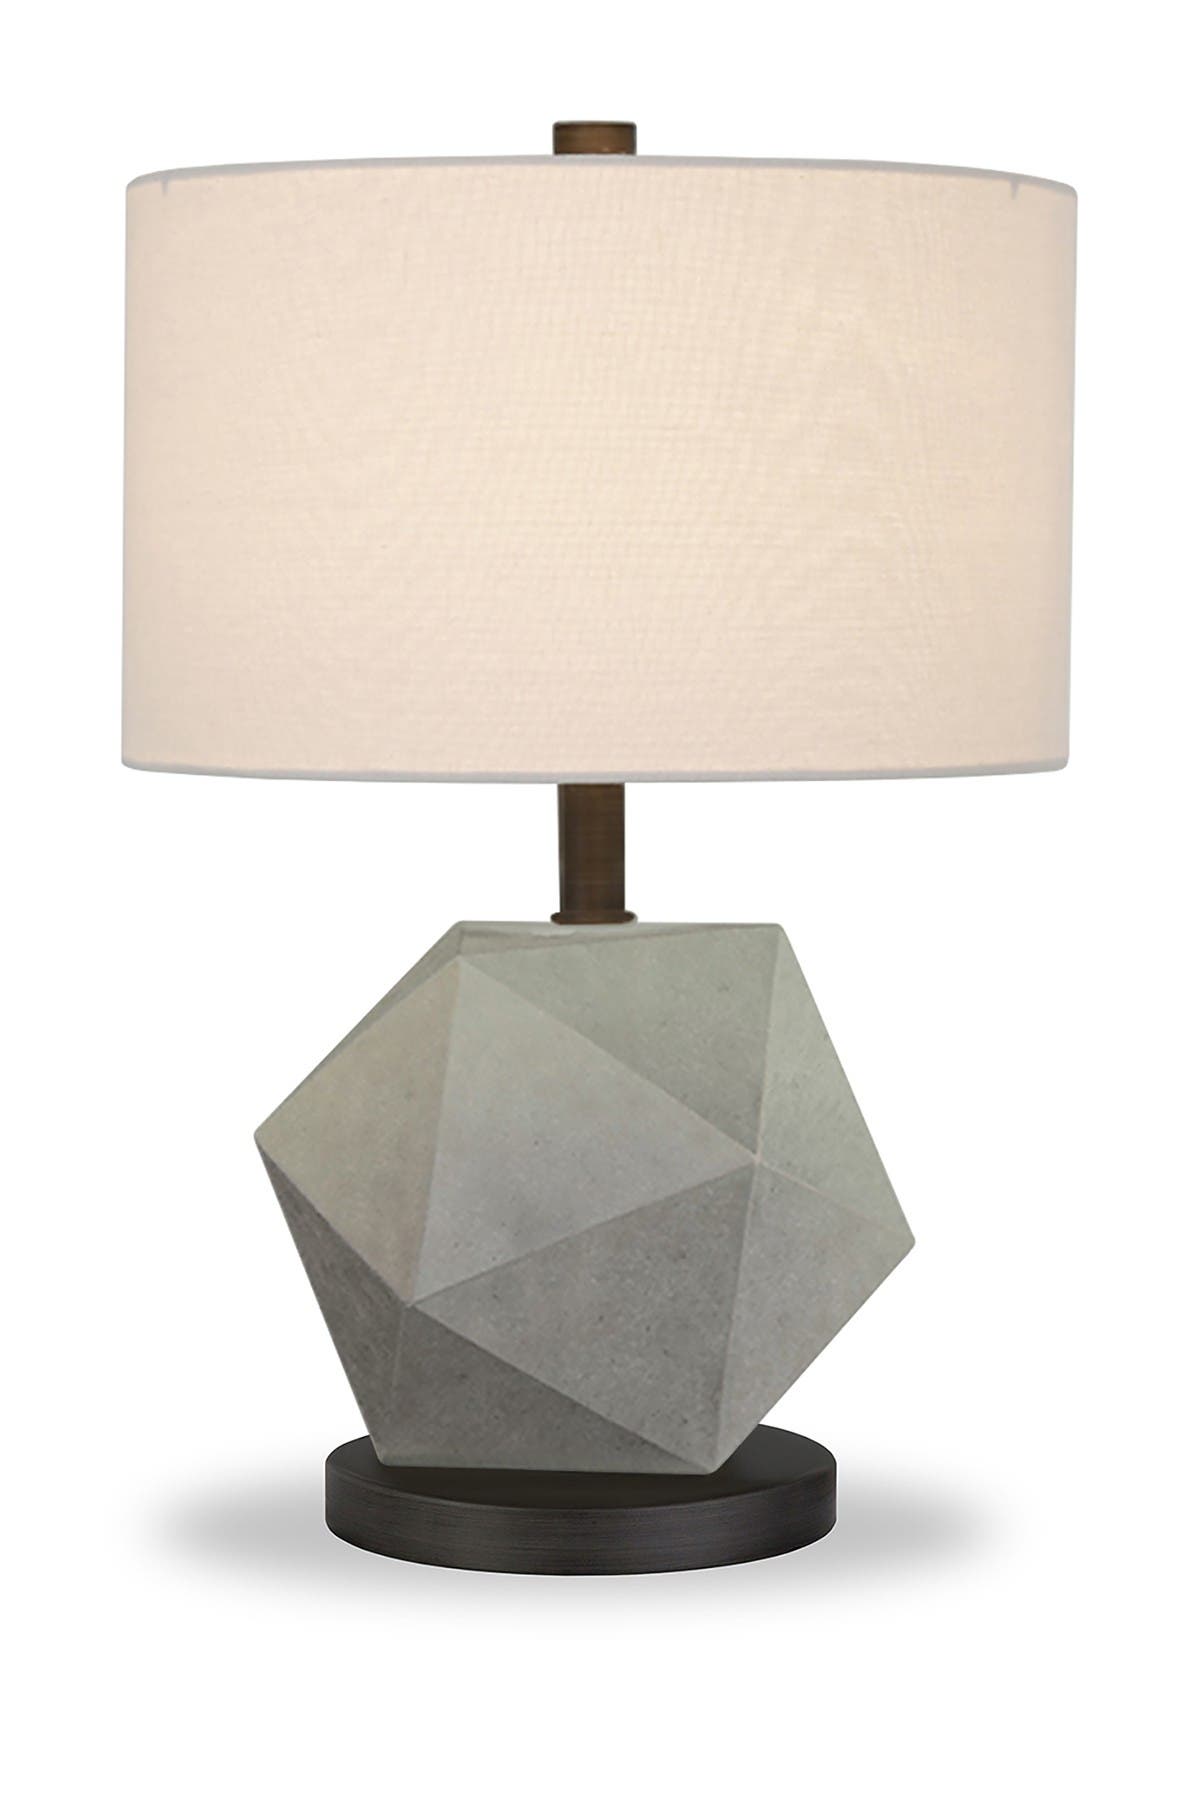 Addison And Lane Kore Table Lamp In Rust/copper